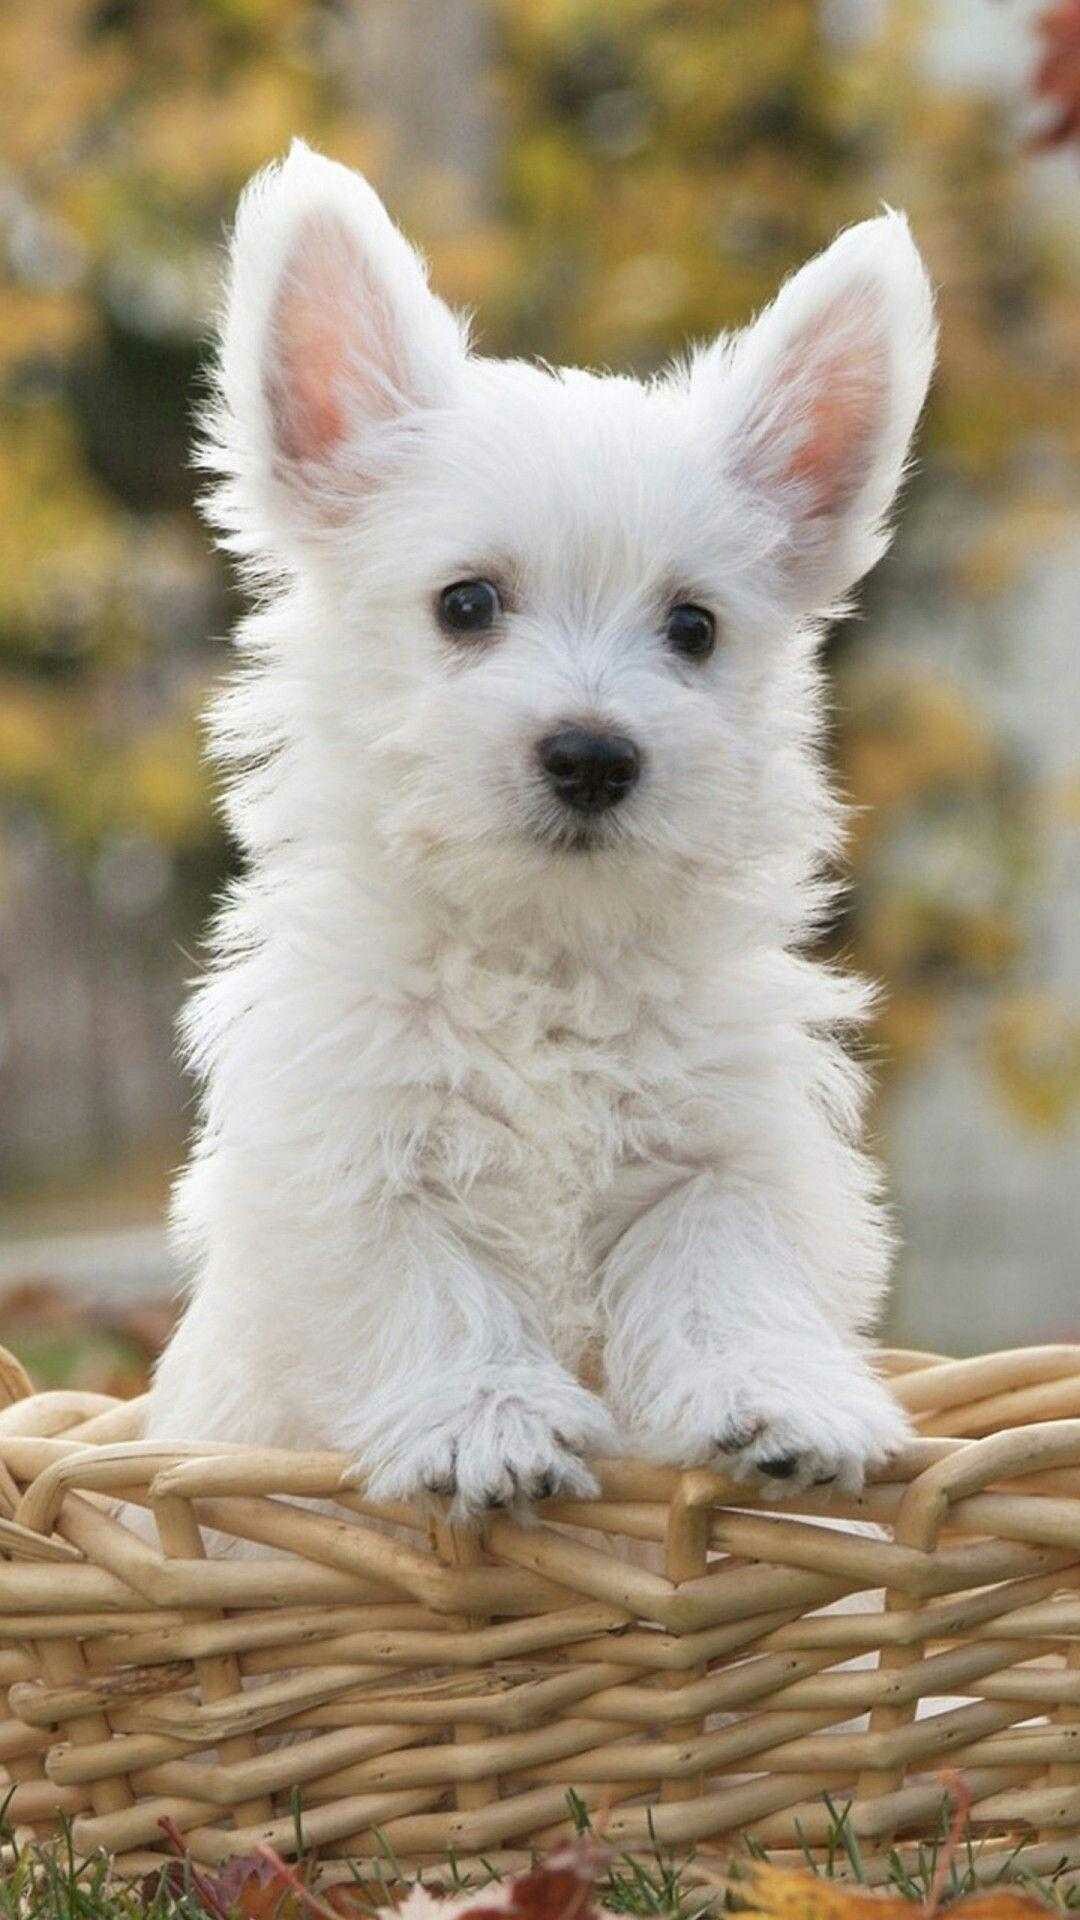 Dog: West Highland White Terrier, A distinctive white harsh coat with a somewhat soft white undercoat. 1080x1920 Full HD Wallpaper.